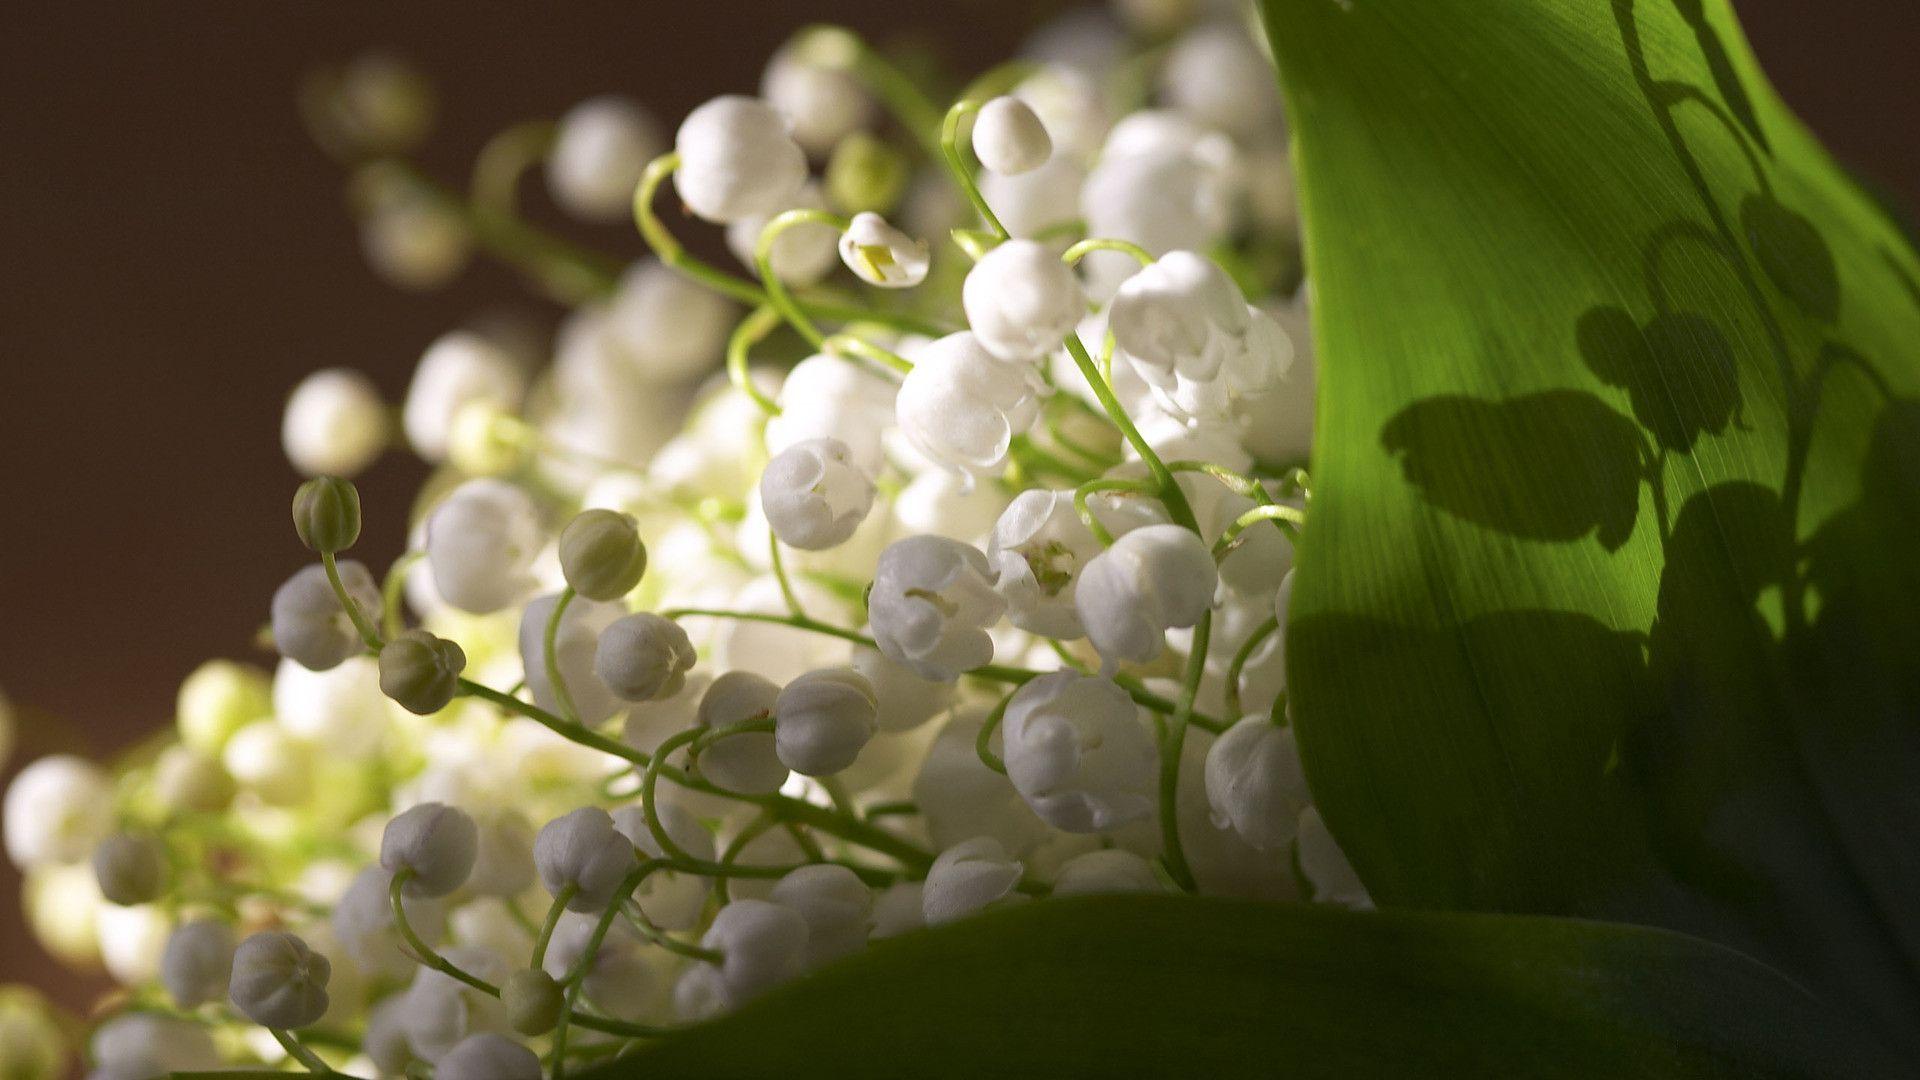 Full HD Lily Of The Valley Flower Wallpaper, Free Widescreen HD